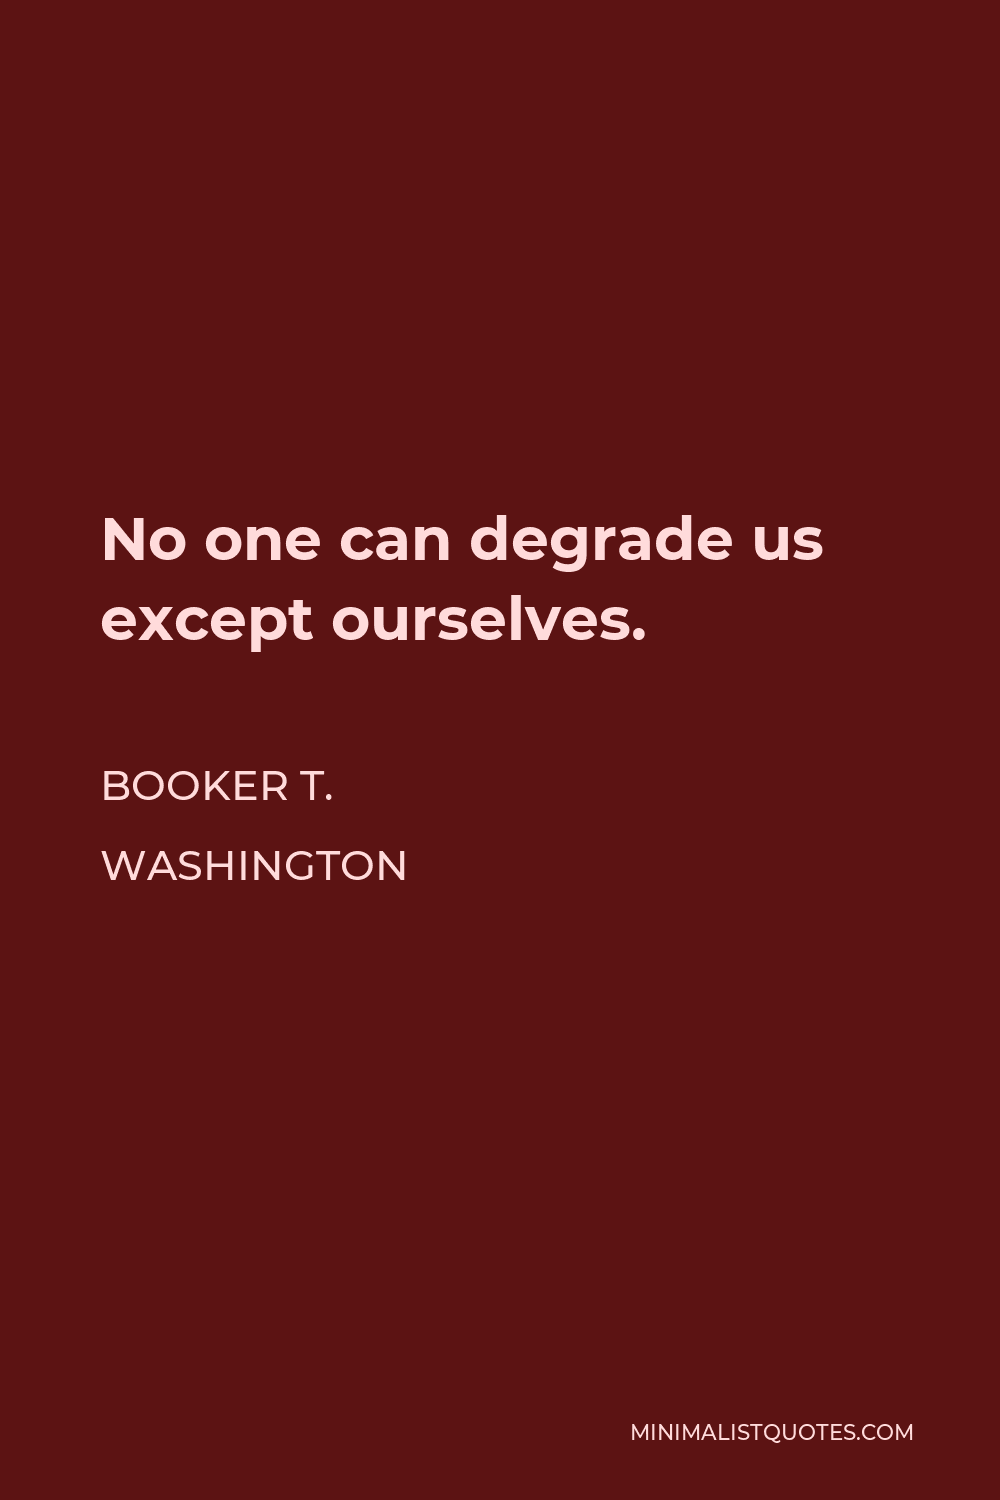 Booker T. Washington Quote - No one can degrade us except ourselves.